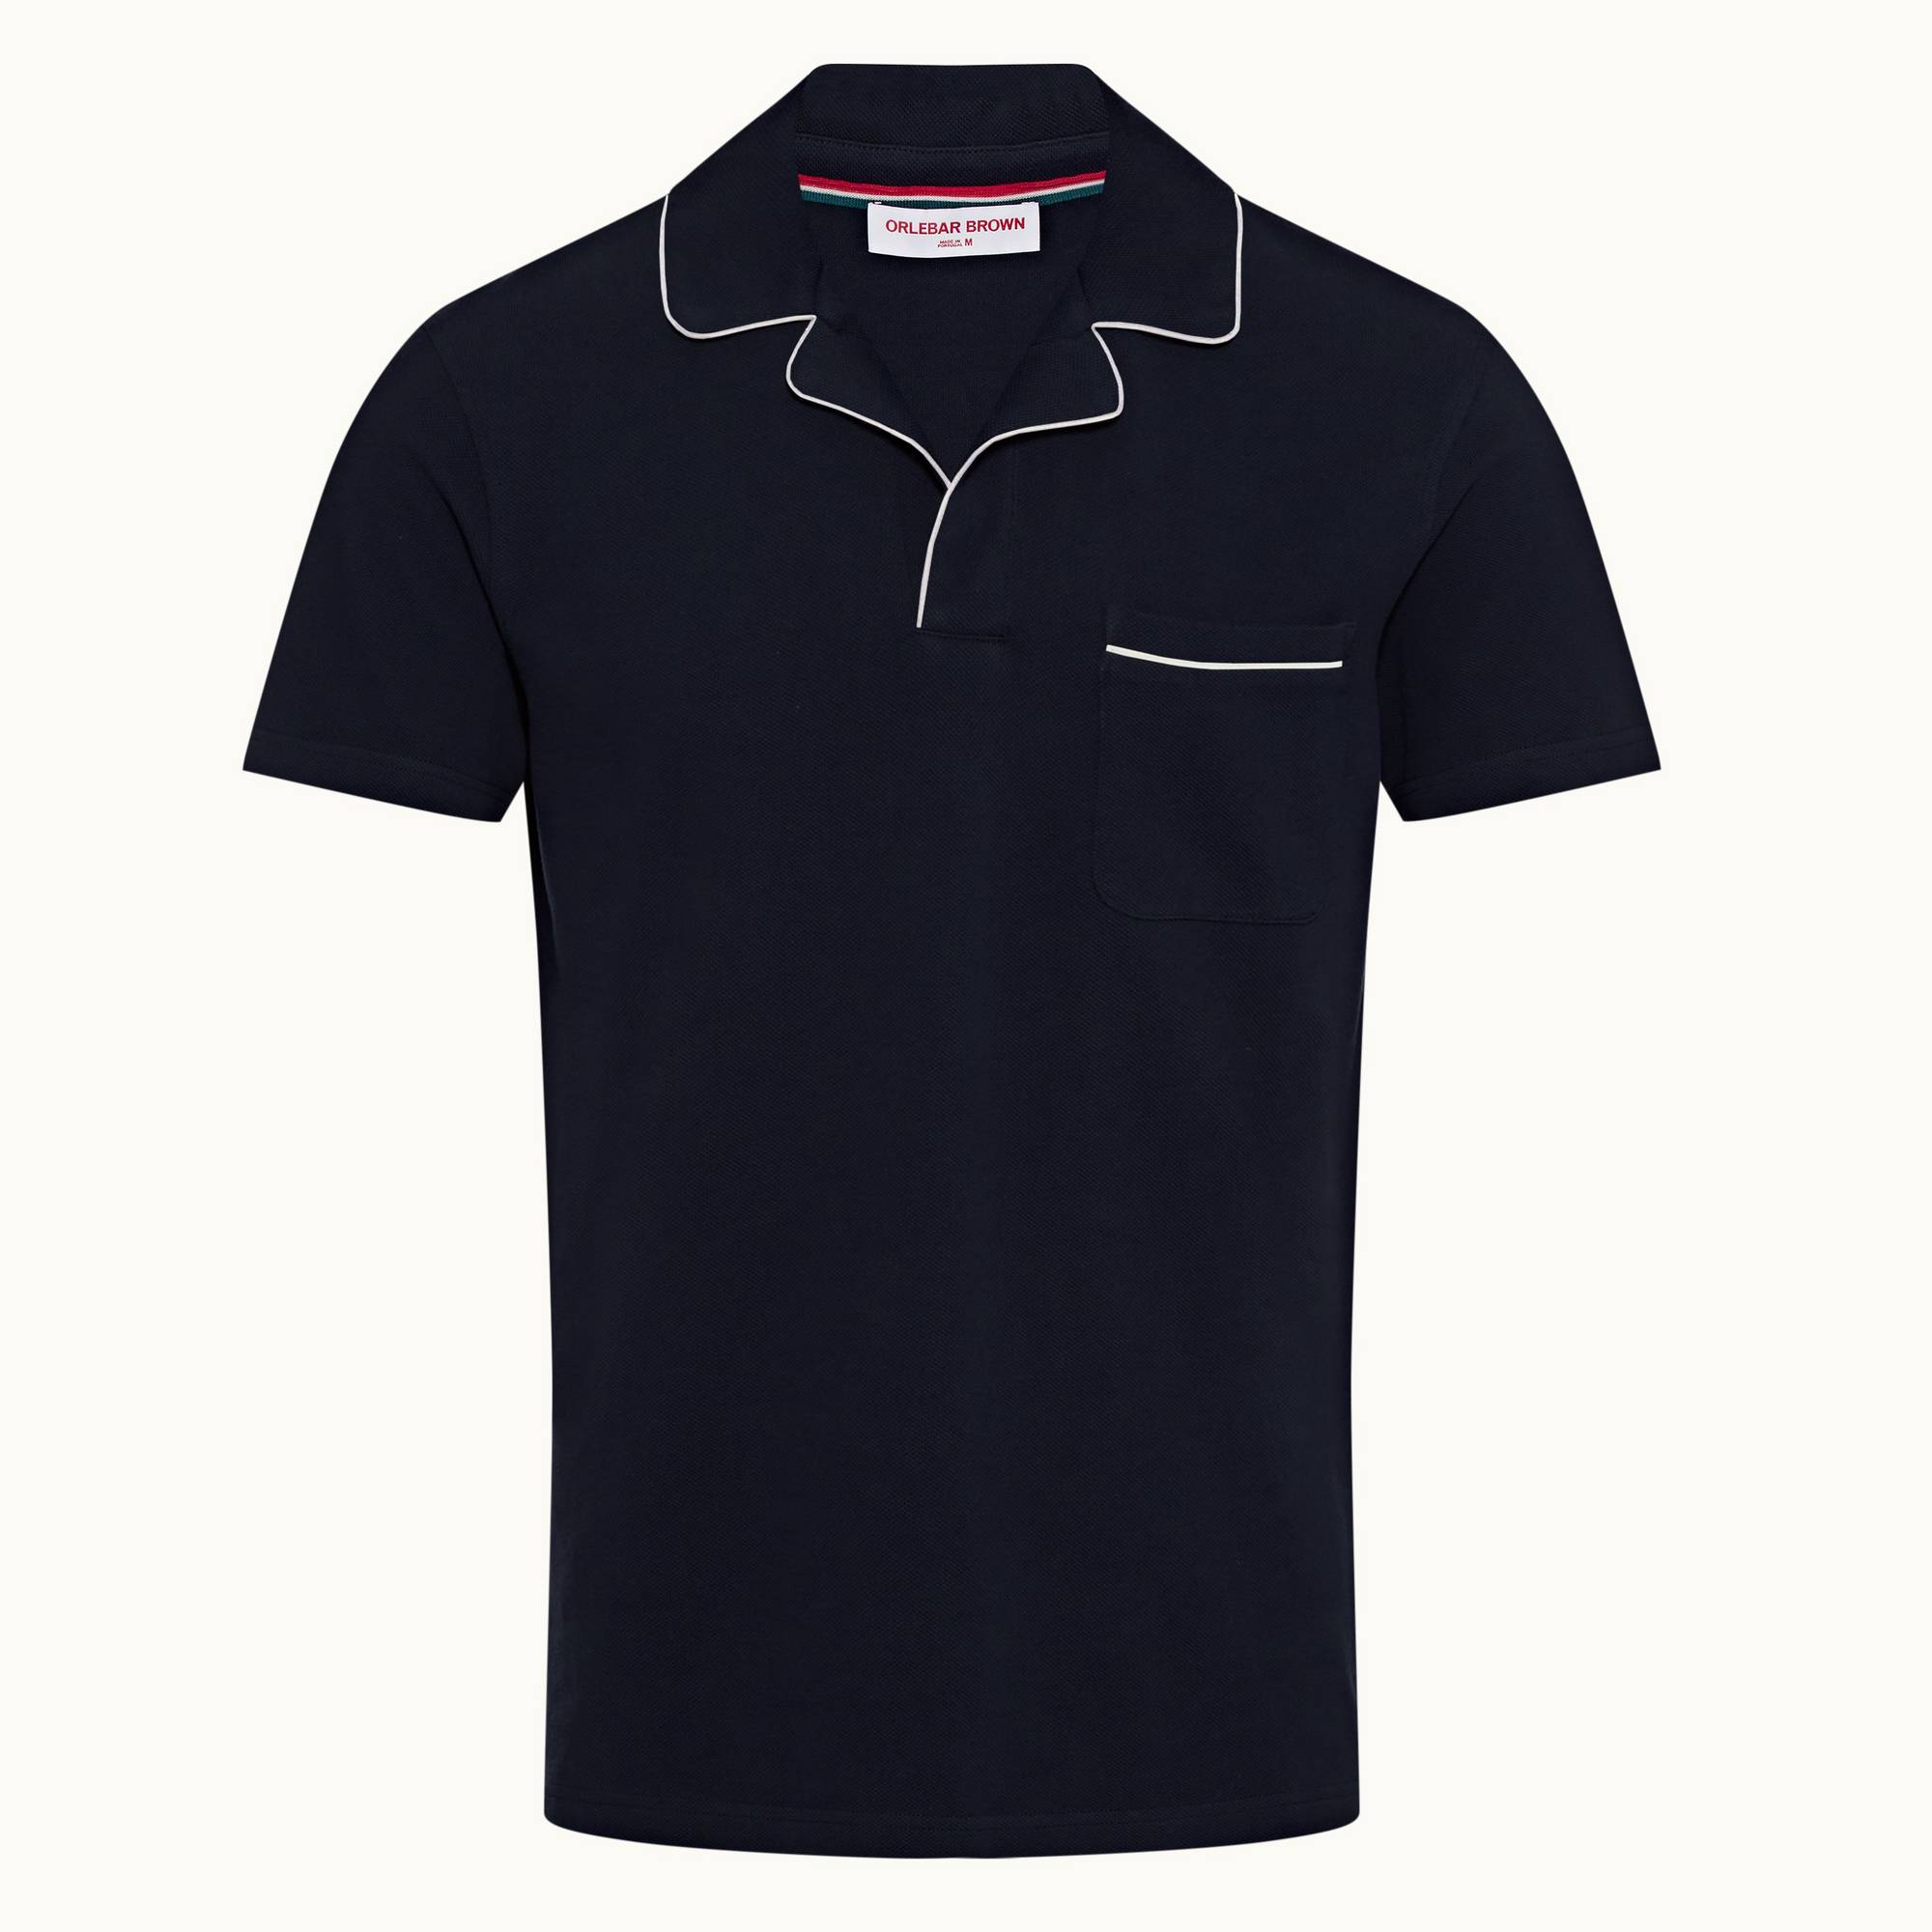 Donald Piping - Mens Navy Classic Fit Contrast Piping Collar Polo Shirt